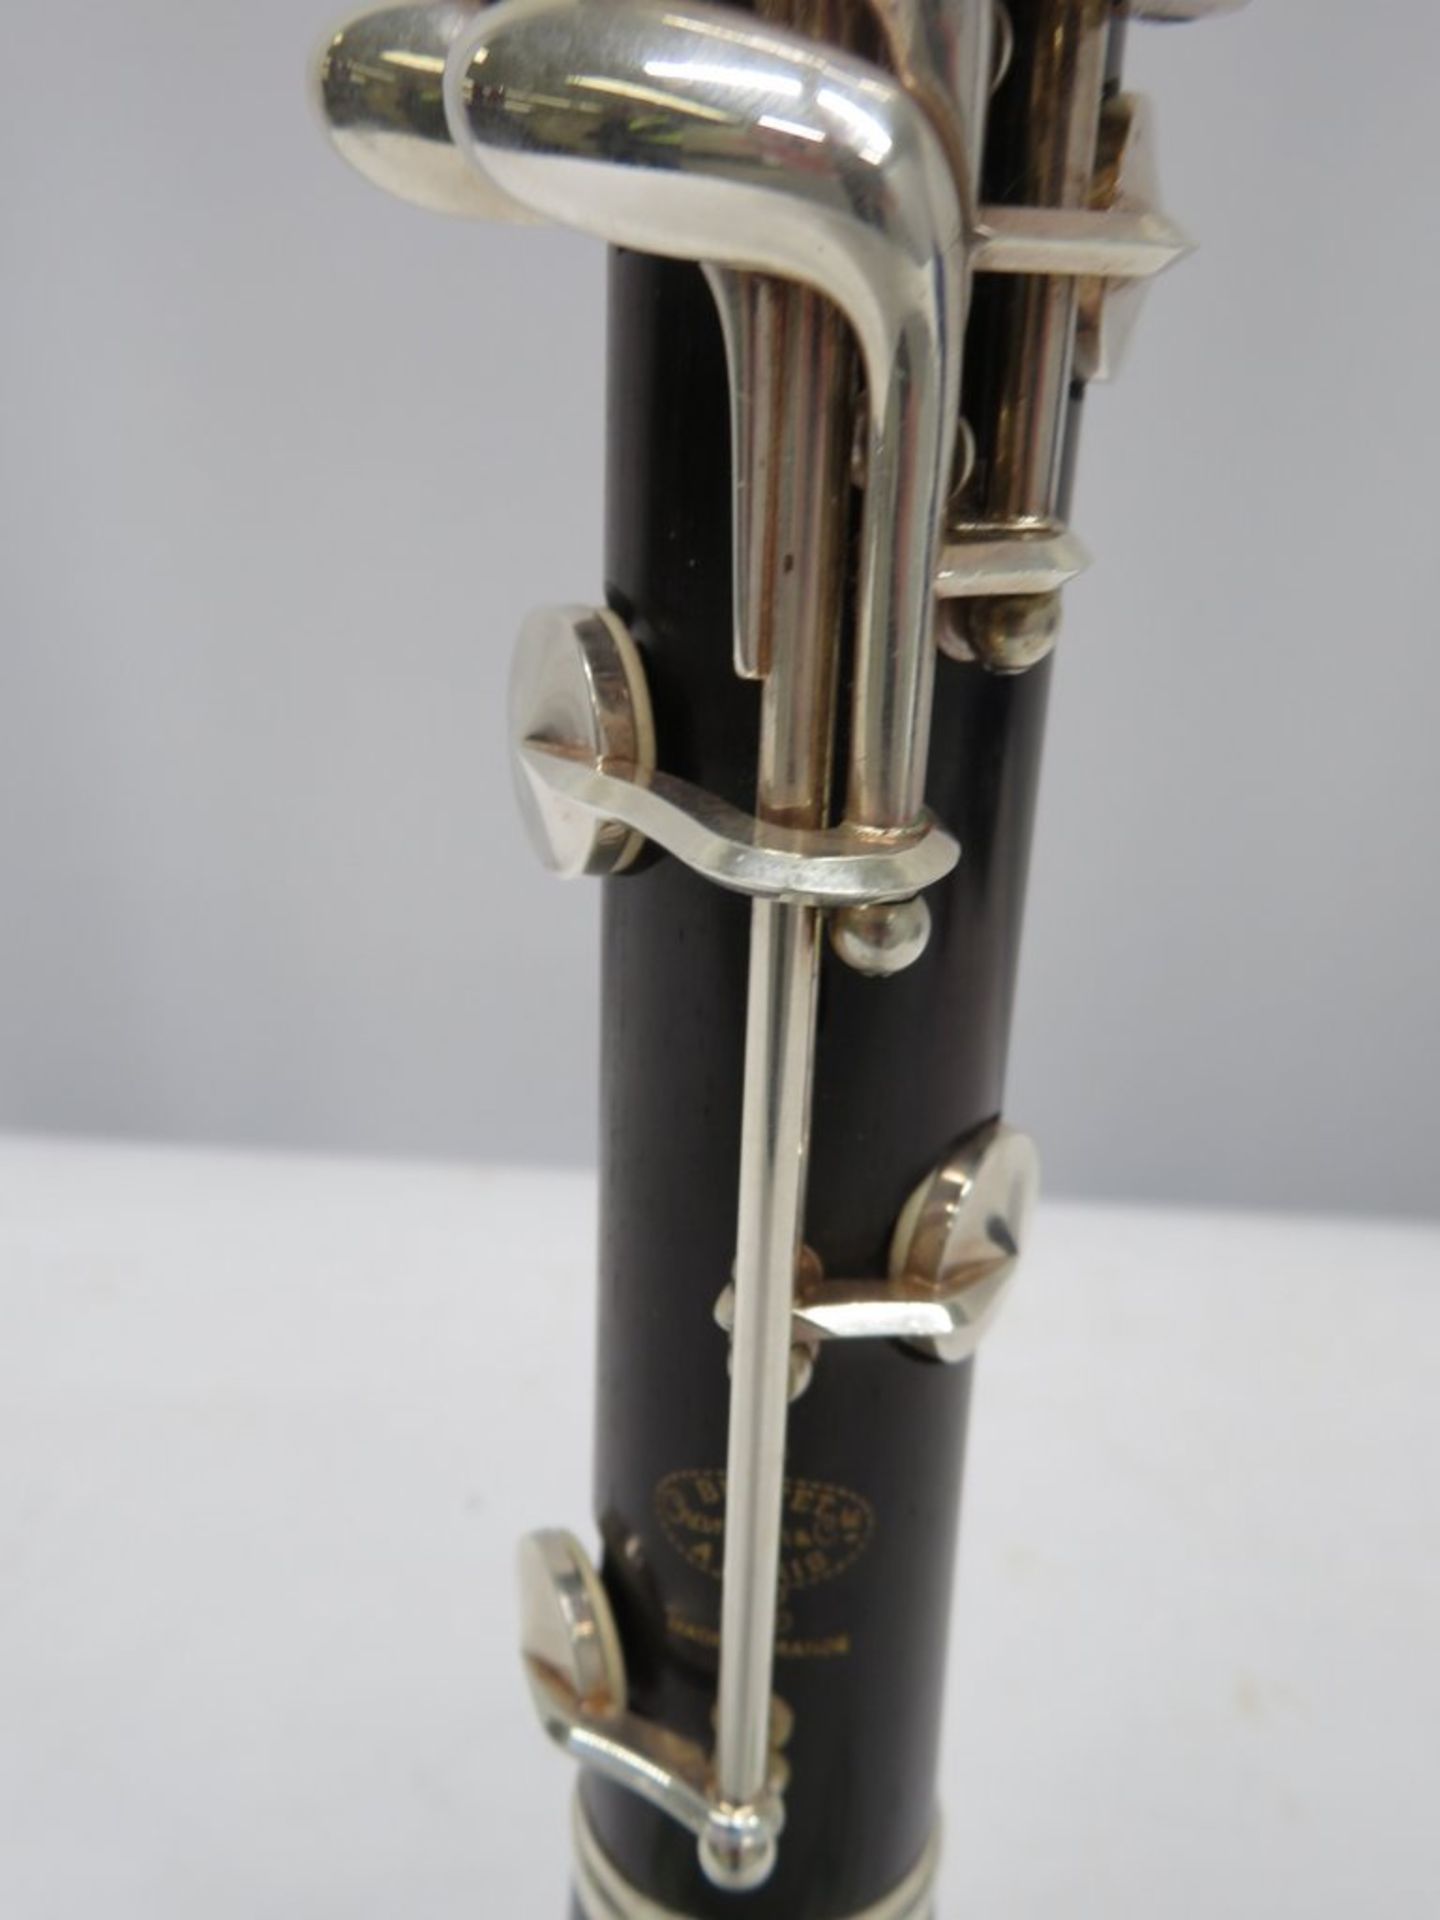 Buffet Crampon R13 Clarinet With Case. Serial Number: 386372. Full Length 63cm. Please No - Image 7 of 14